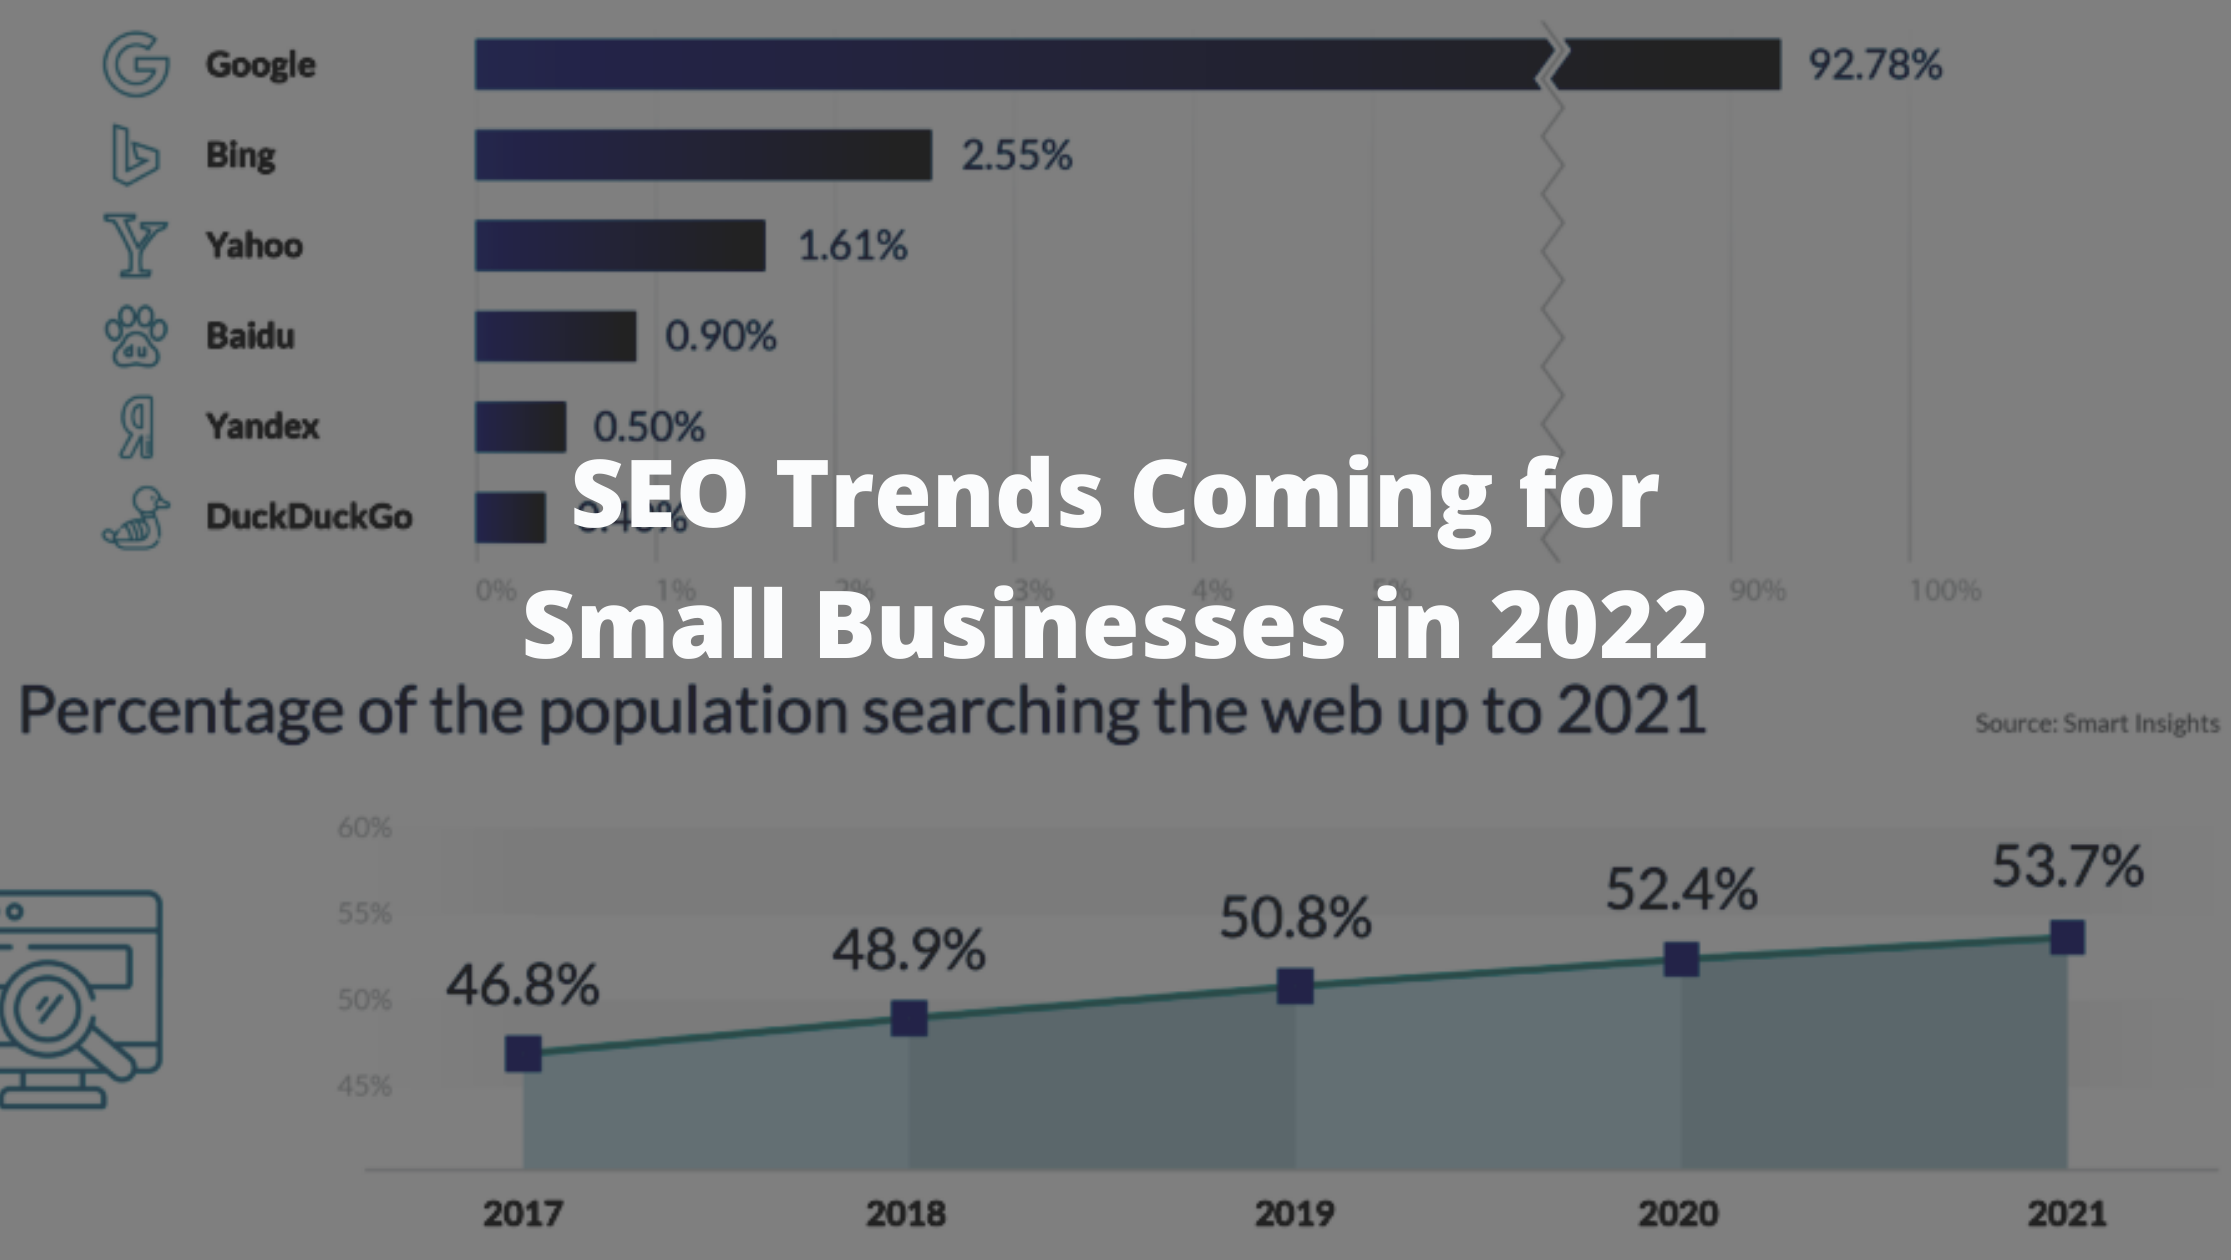 SEO Trends Coming for Small Businesses in 2022